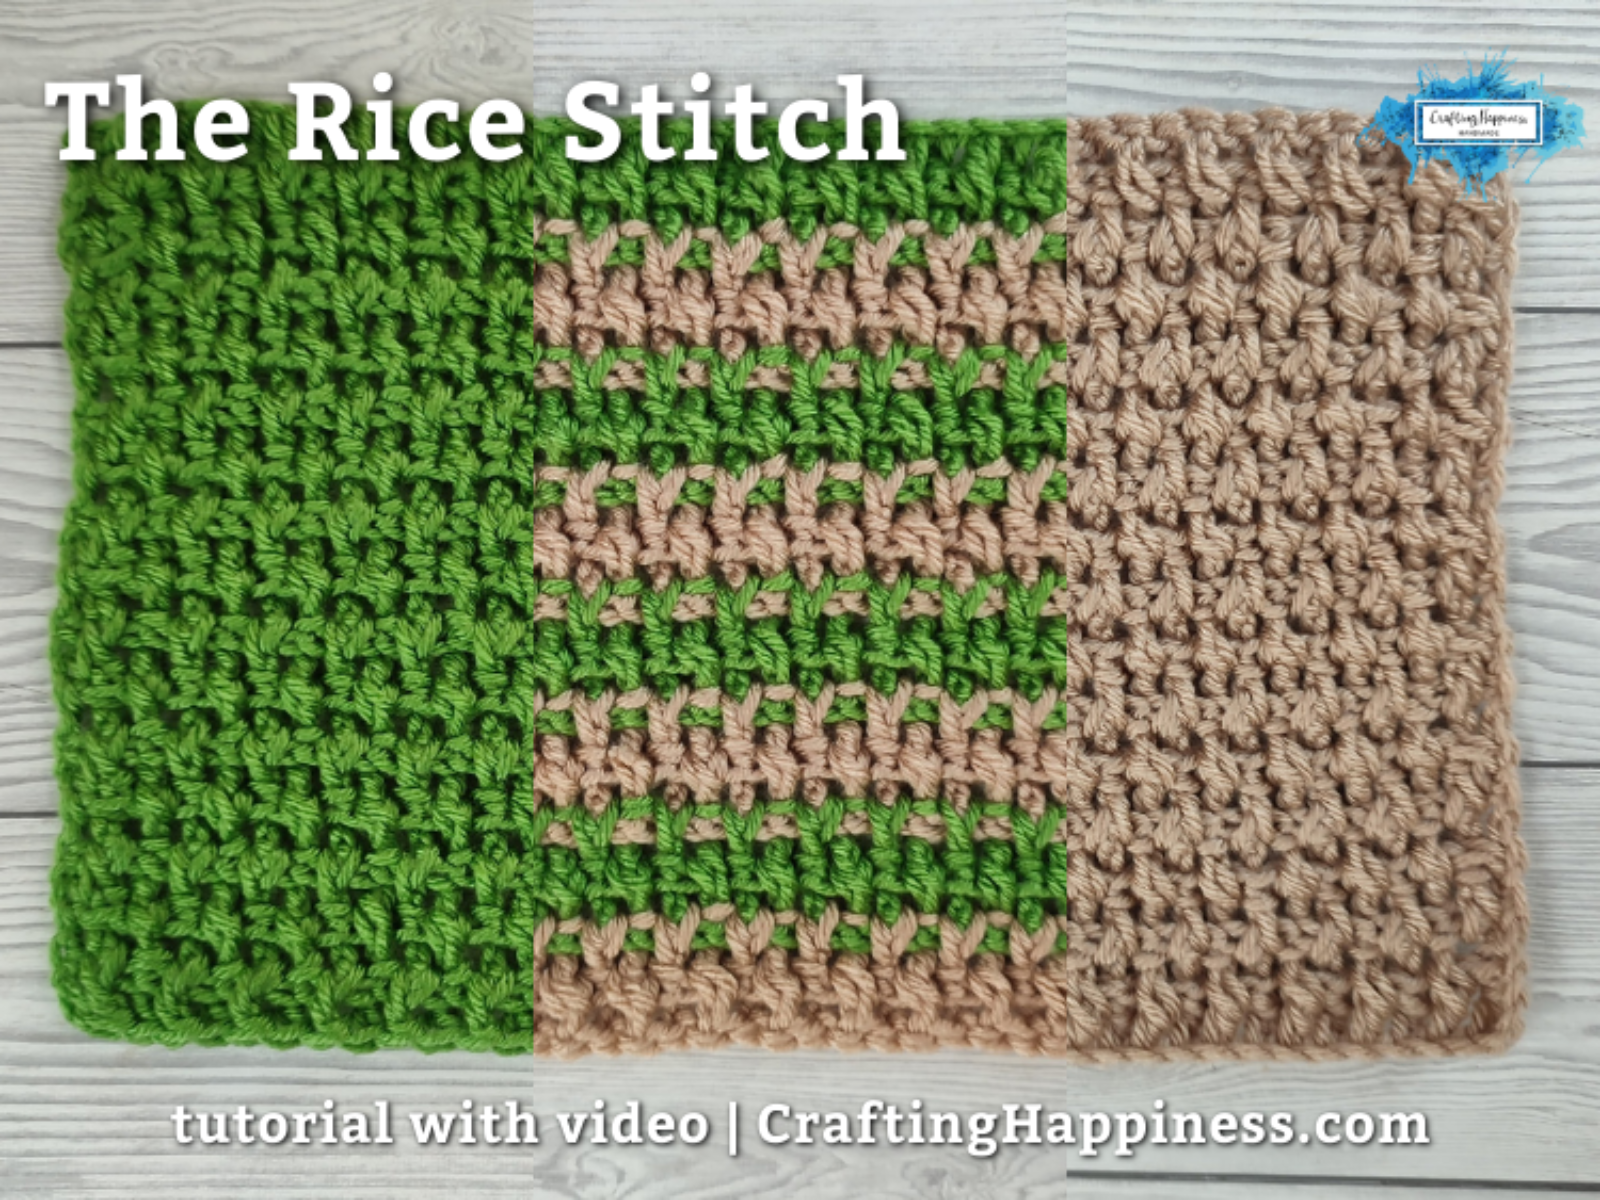 FB BLOG POSTER - The Rice Stitch by Crafting Happiness